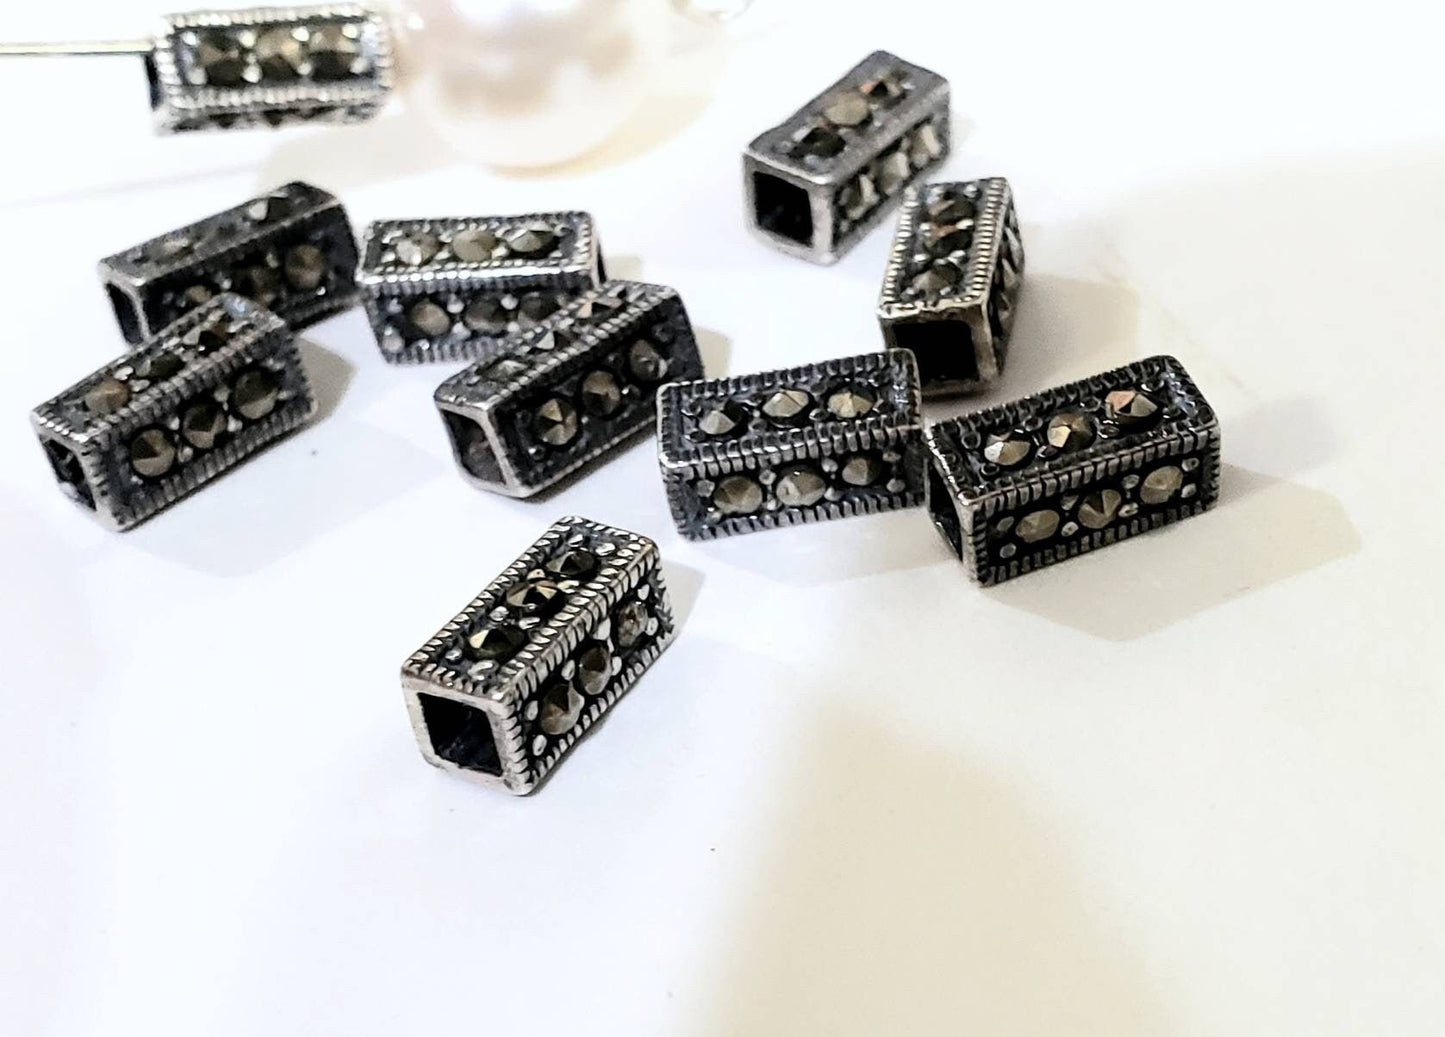 2 pieces Marcasite 925 sterling silver 4.5x9mm square rectangular shape vintage Antique spacer bead , jewelry making spacer bead.